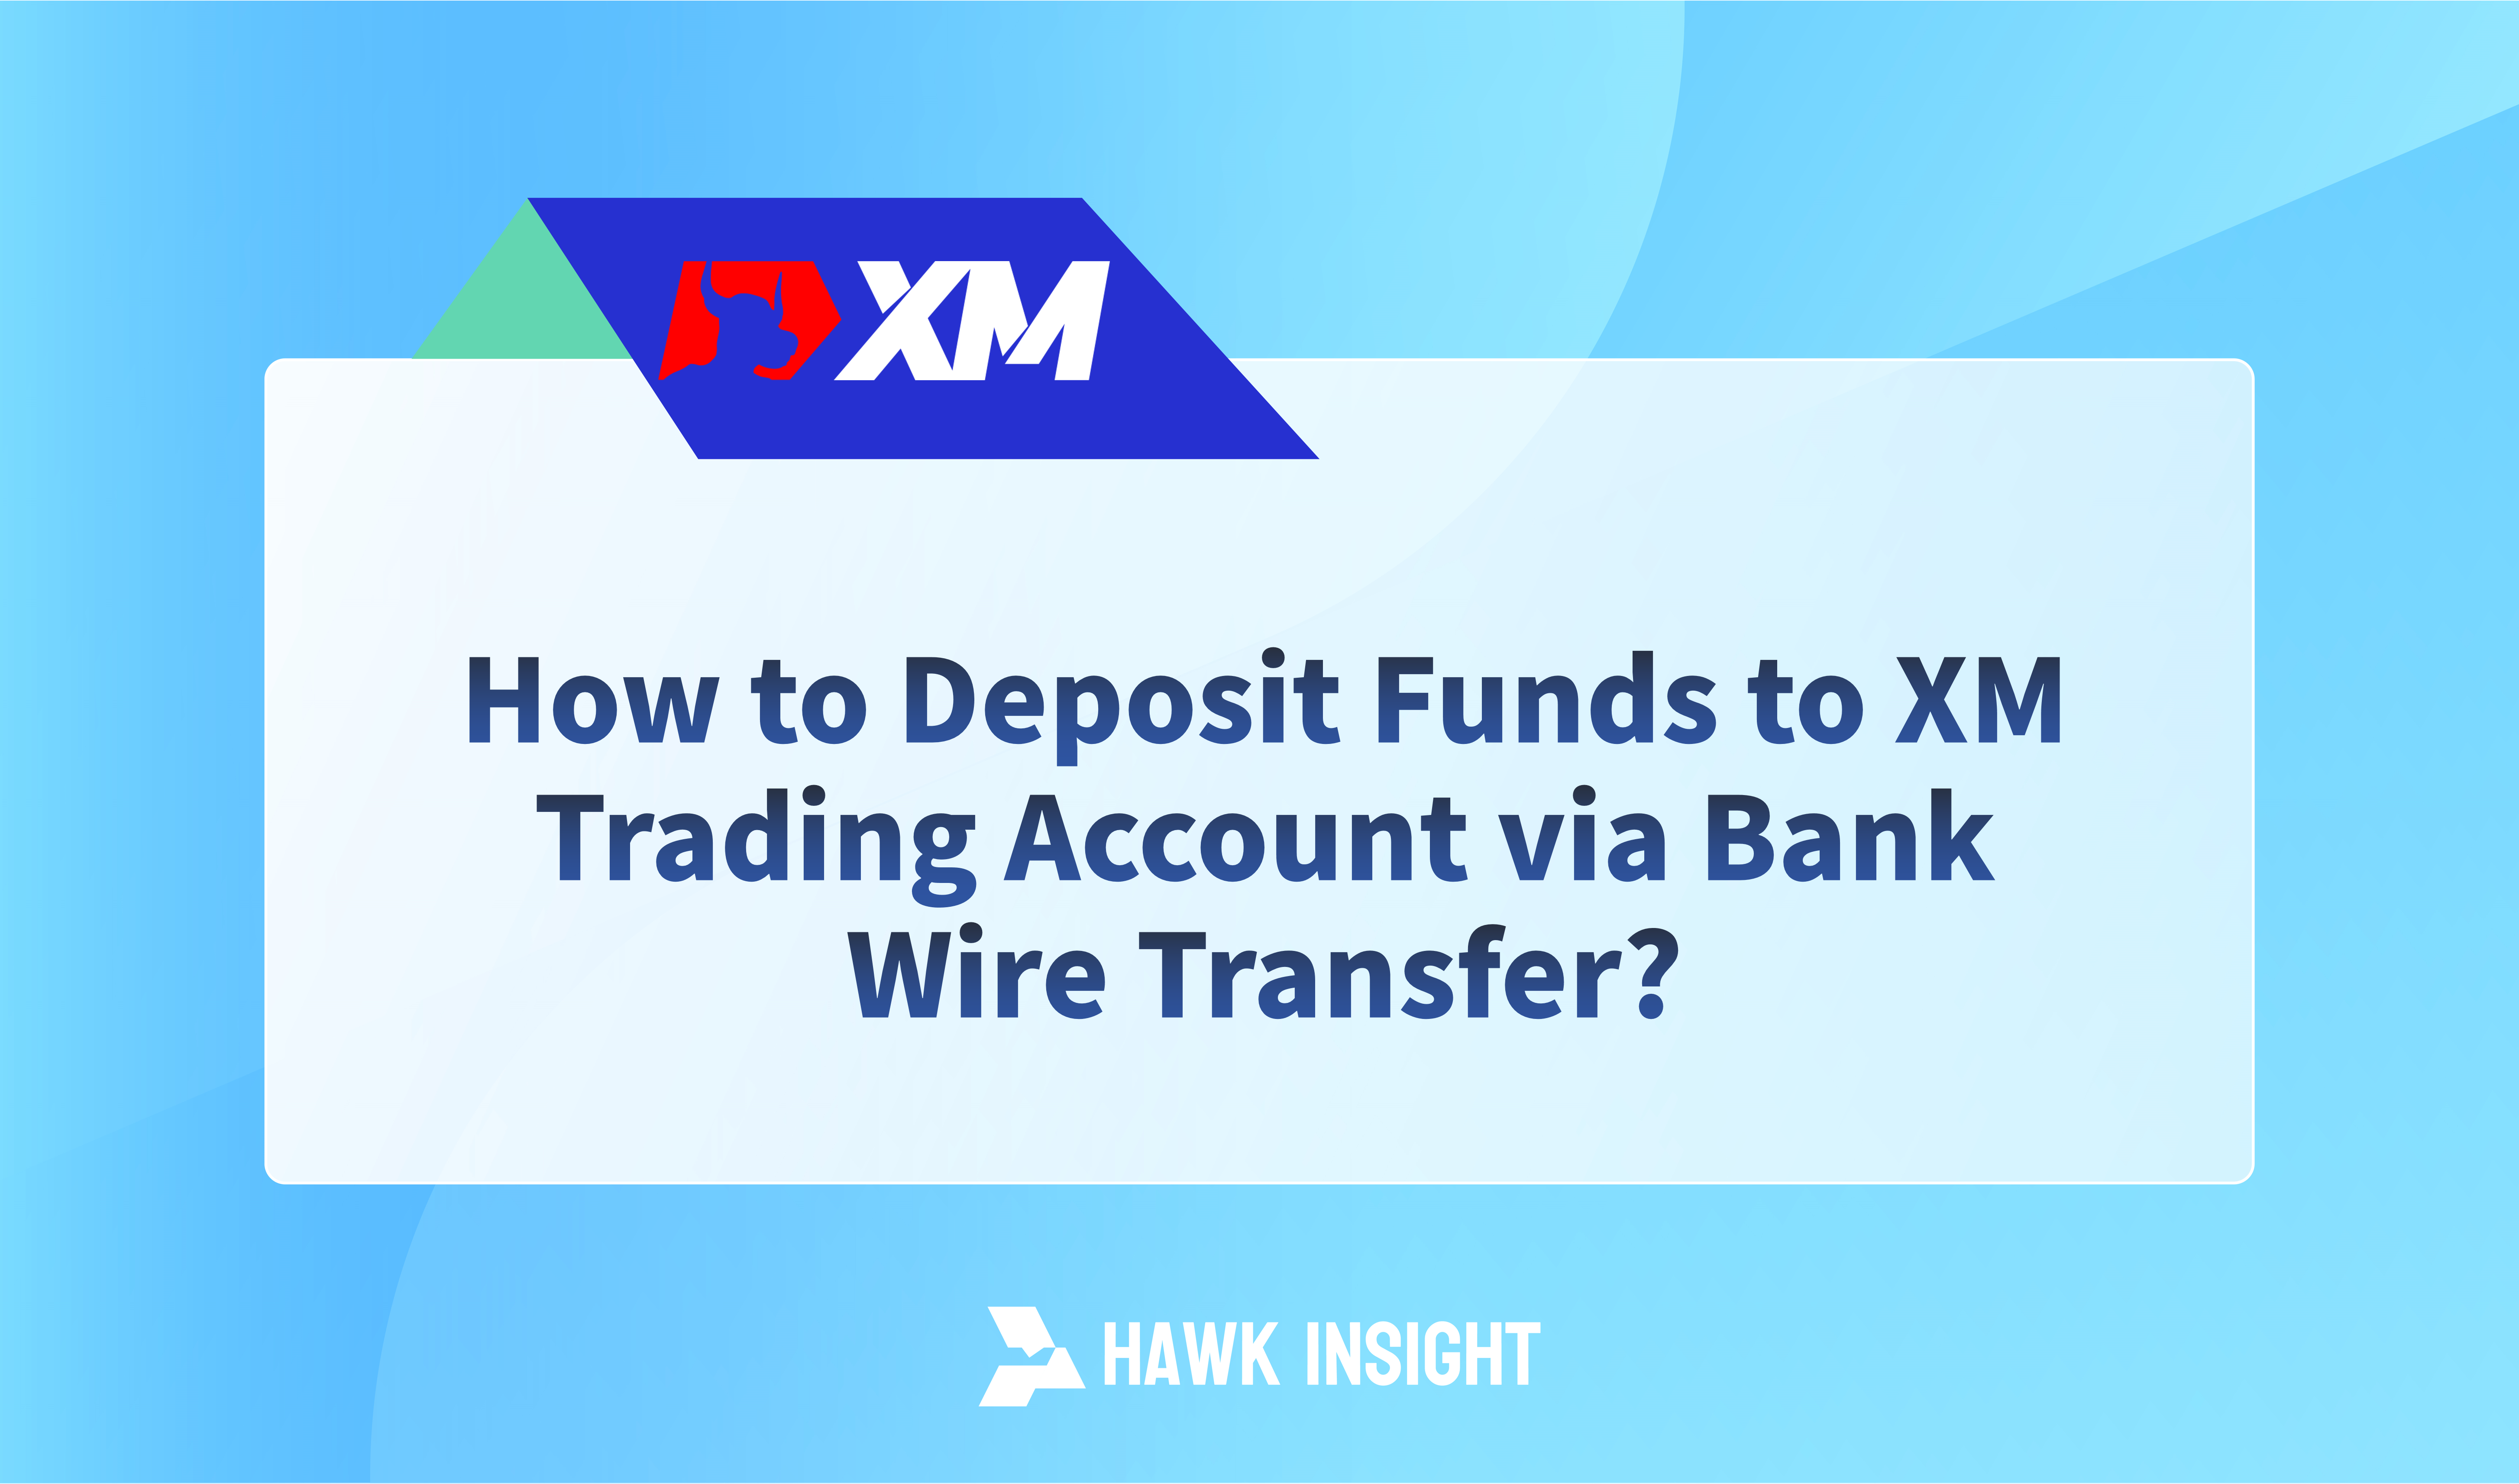 How to Deposit Funds to XM Trading Account via Bank Wire Transfer?